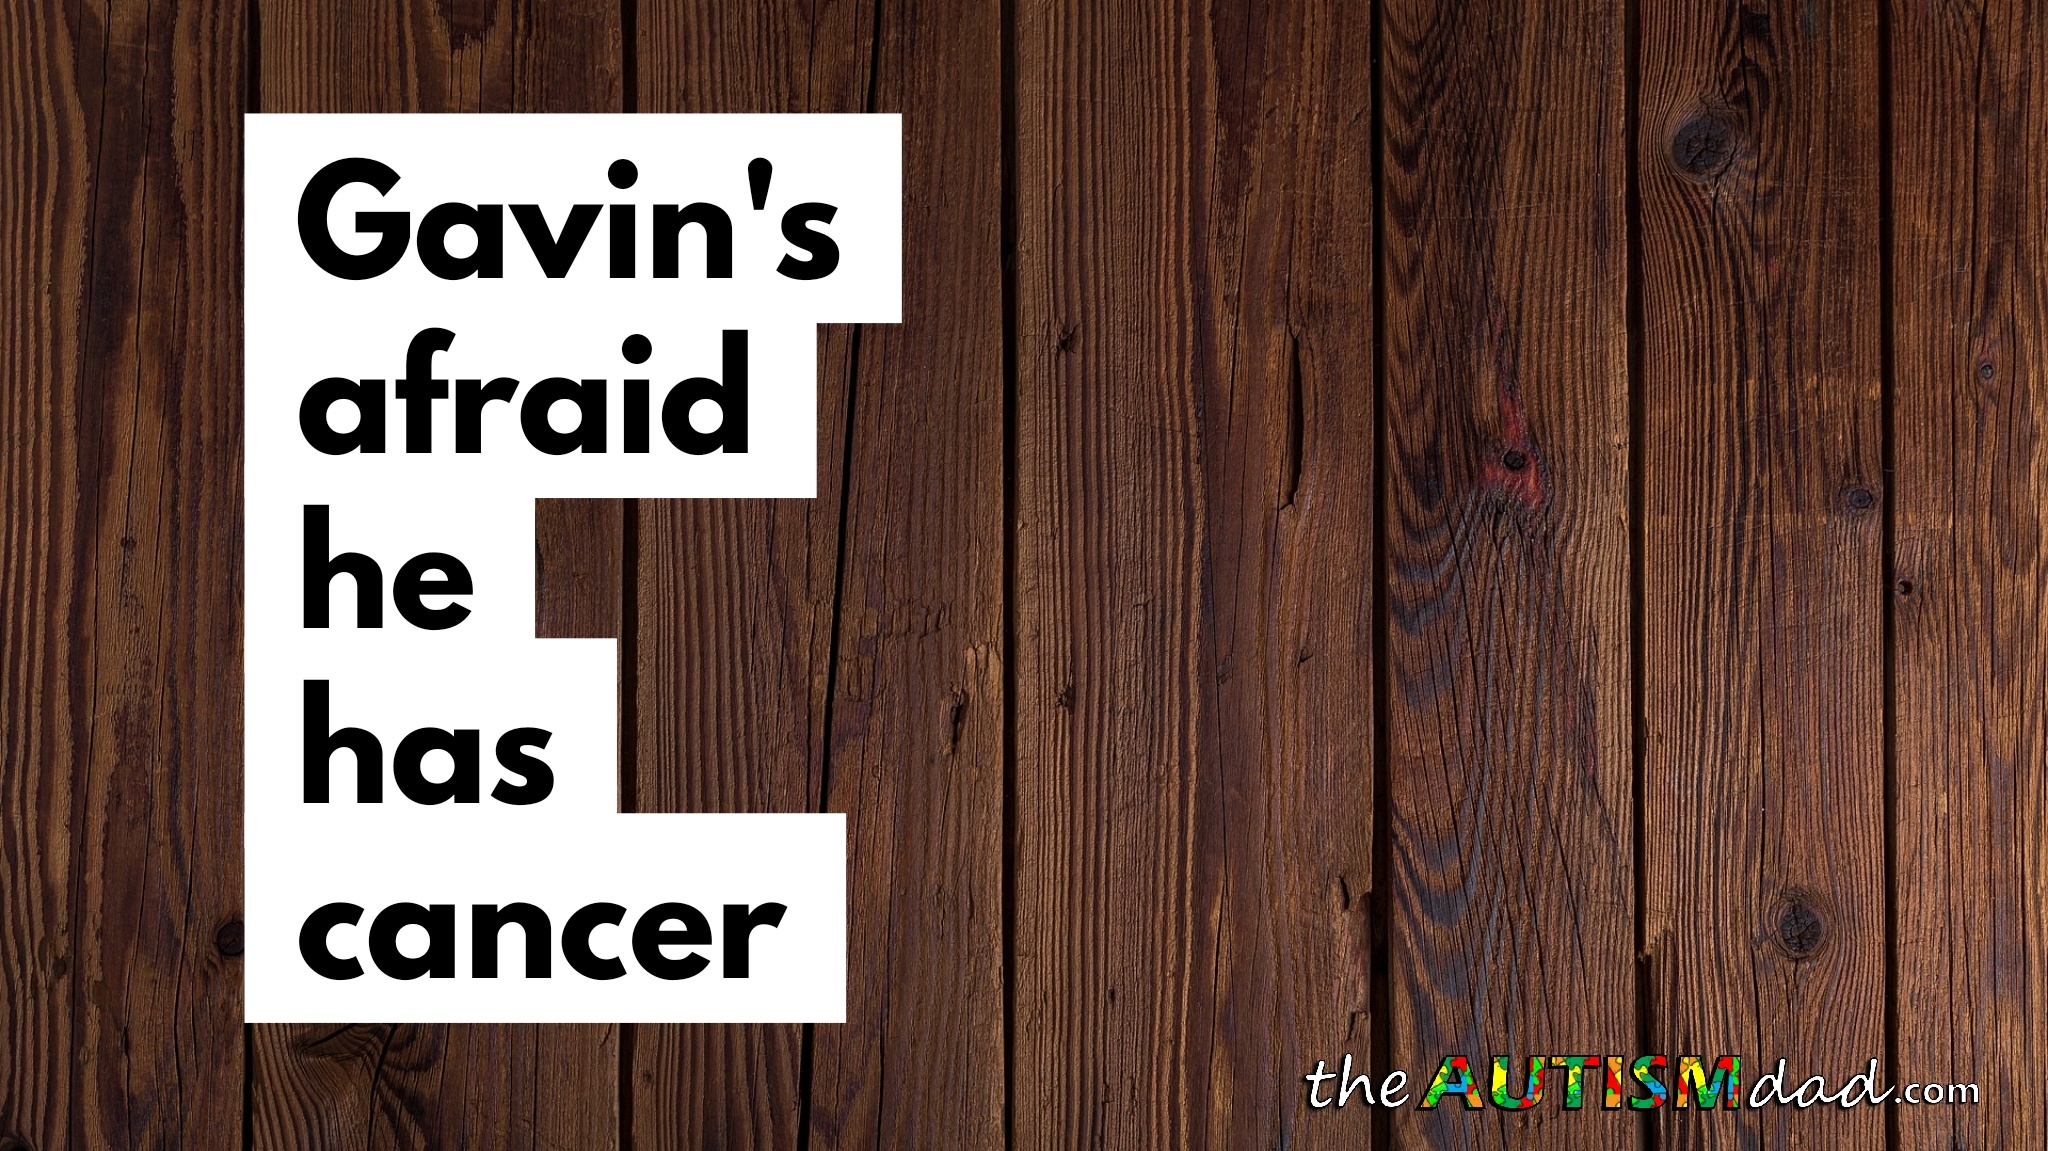 Read more about the article Gavin’s afraid he has cancer